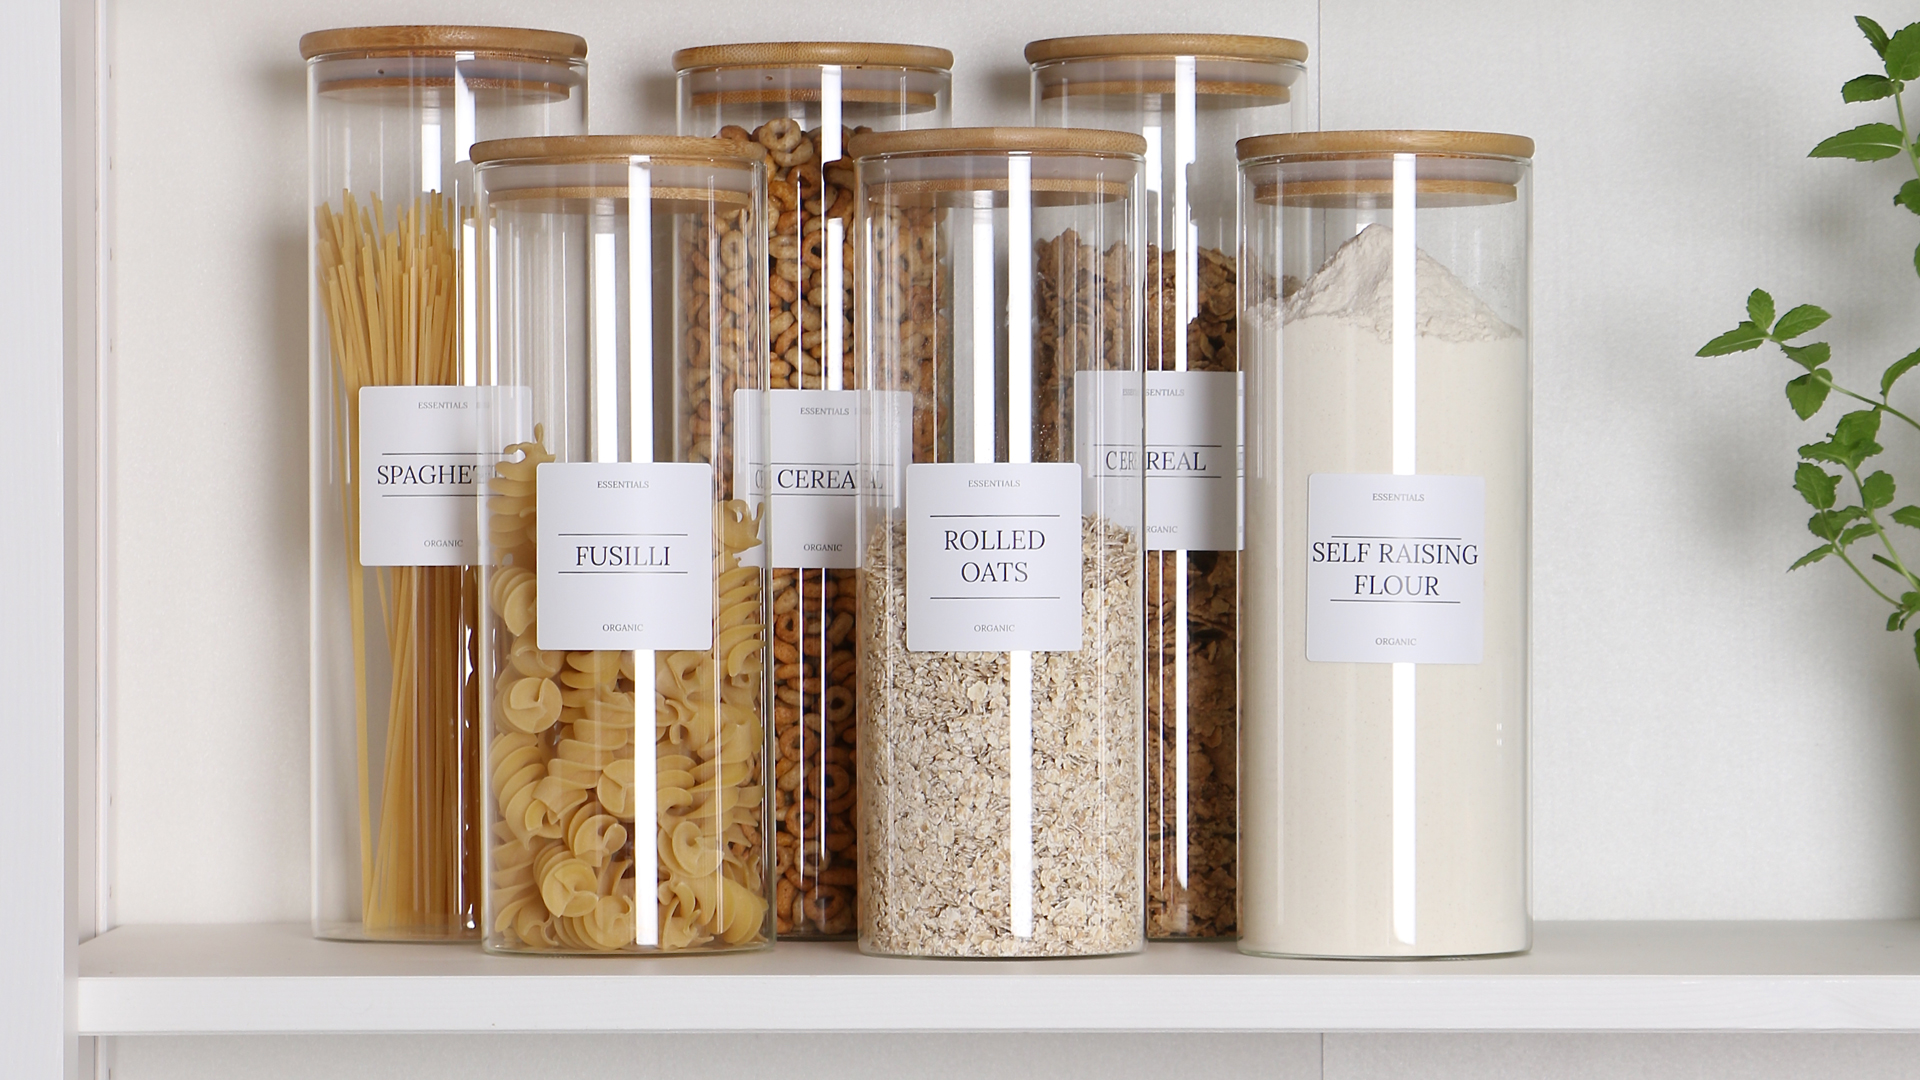 How to organize a pantry with labelled glass jars for storage for dried goods